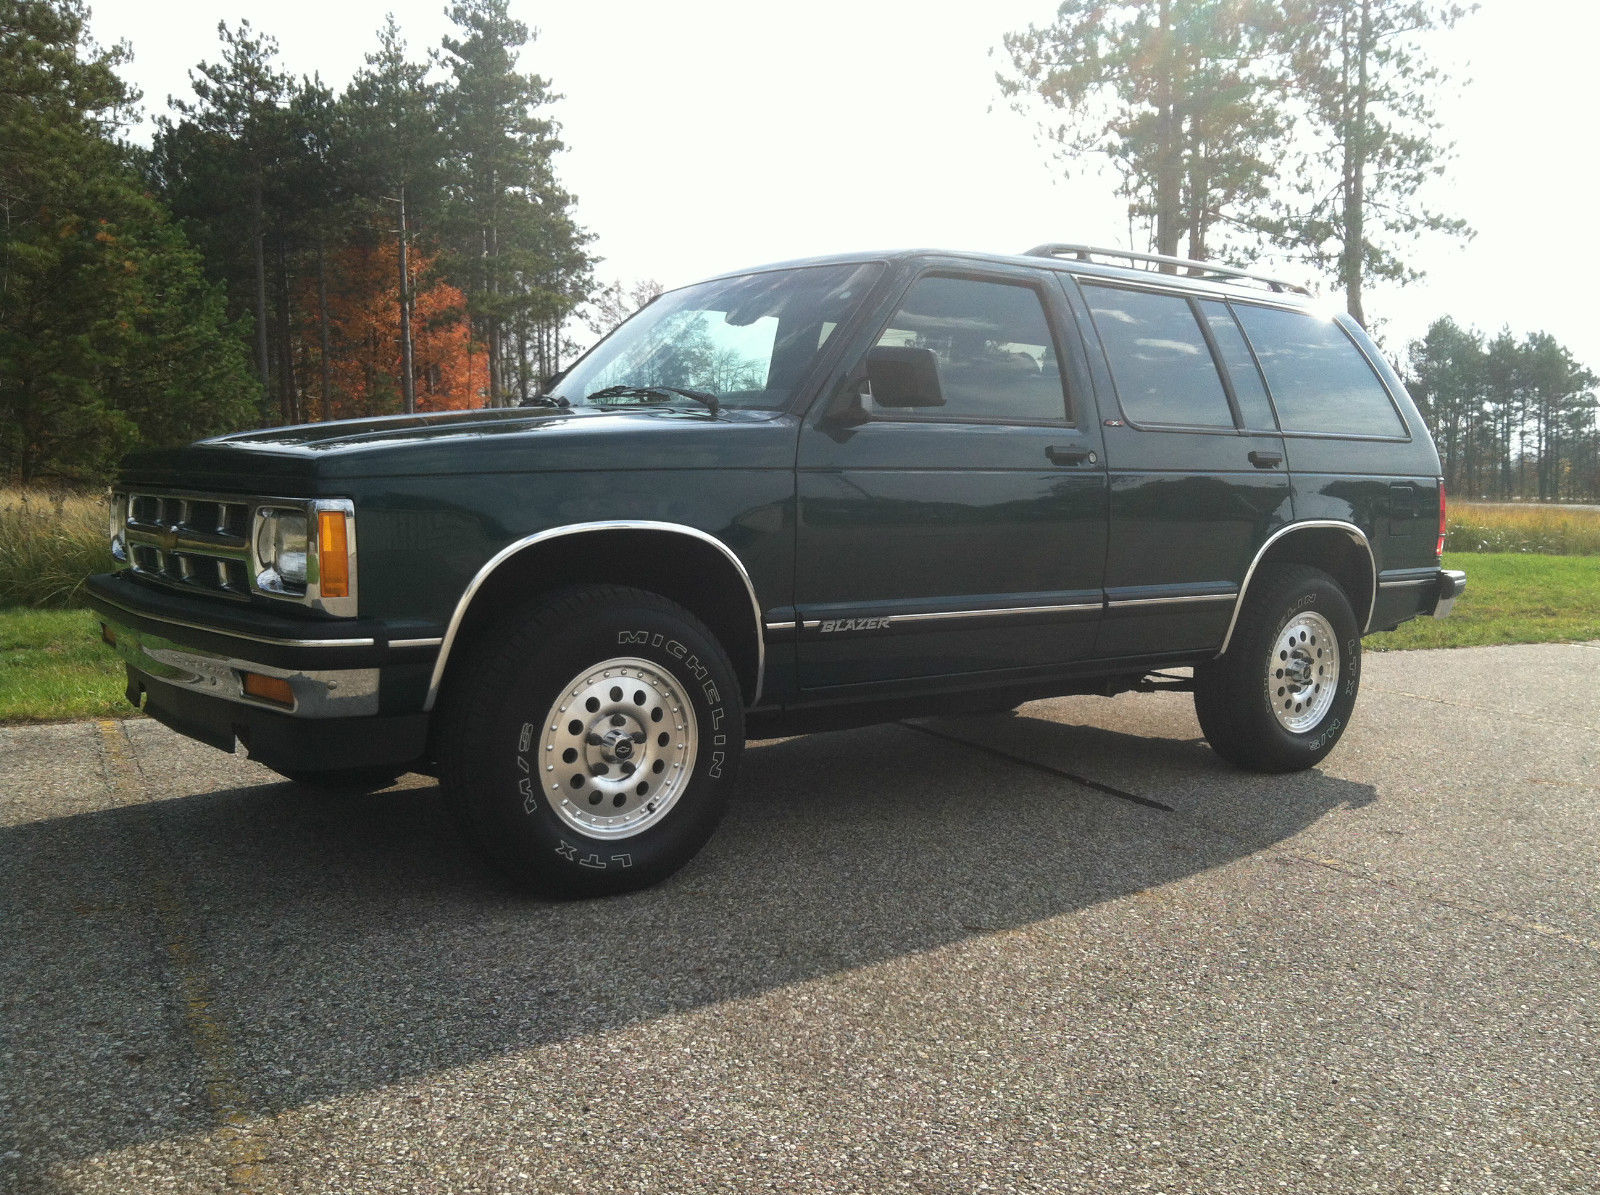 1994 Chevrolet 4dr 4WD S10 Blazer Tahoe Trim, Family Owned